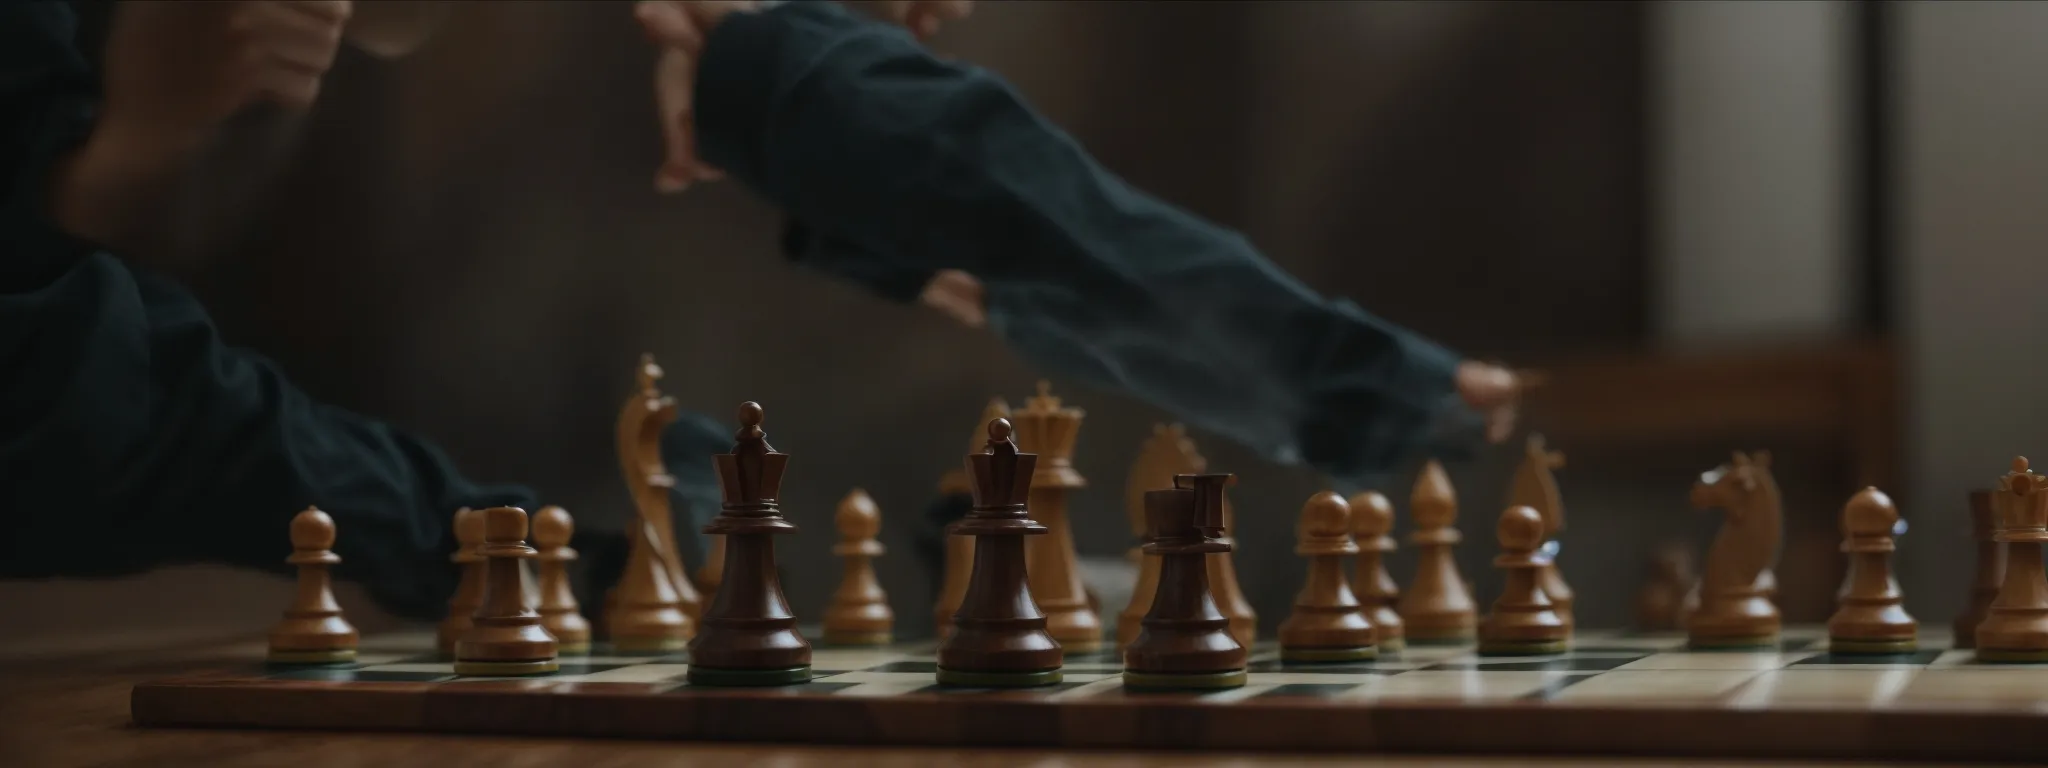 chess pieces strategically positioned on a board, highlighting a pivotal move.